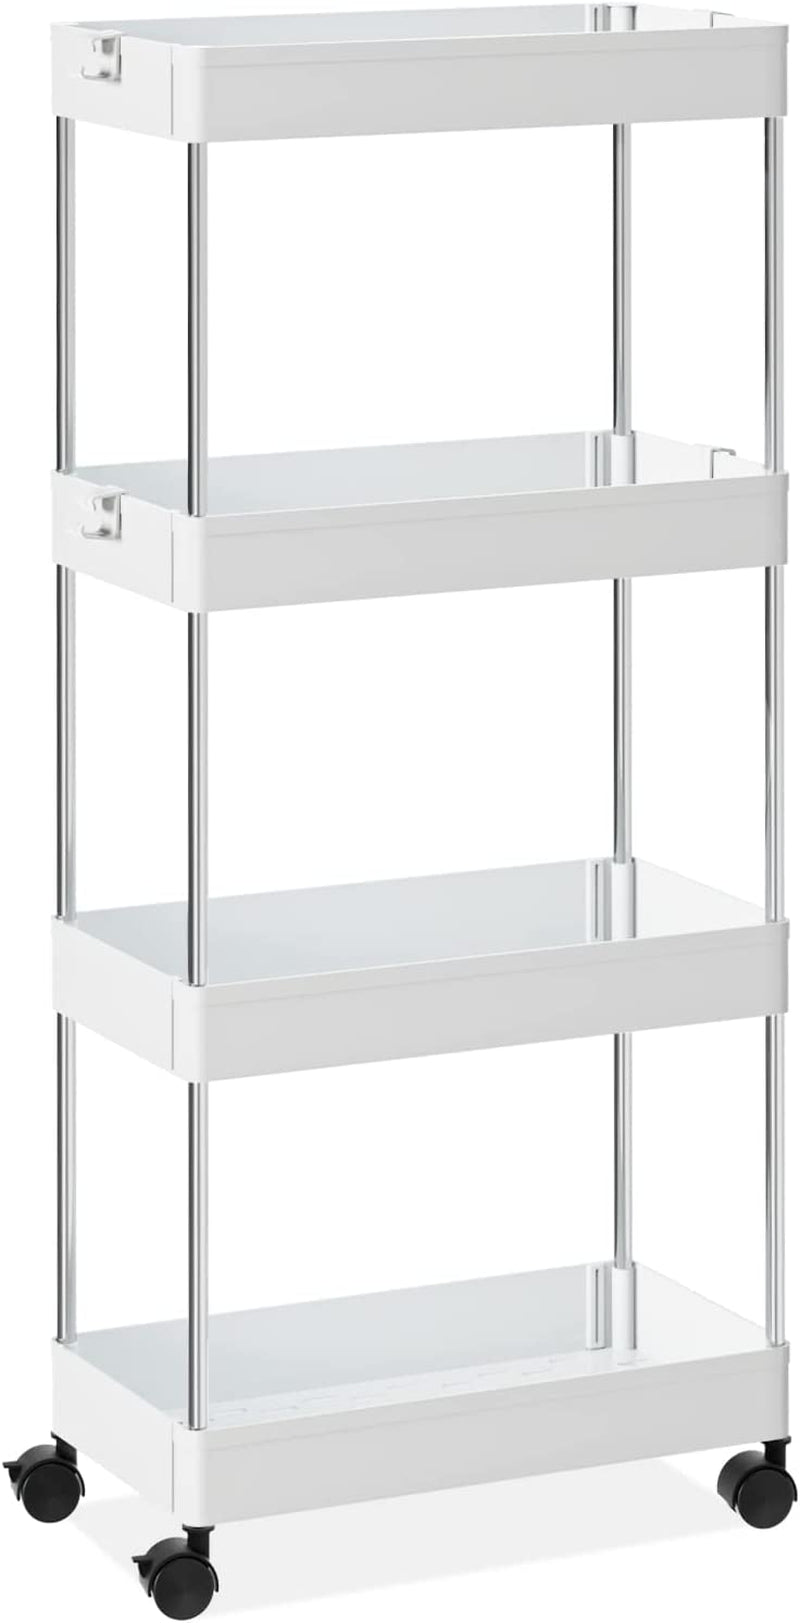 OTK Slim Storage Cart 3 Tier Mobile Shelving Unit Organizer, Utility Rolling Shelf Cart with Wheels for Bathroom Kitchen Bedroom Office Laundry Narrow Places，White Home & Garden > Household Supplies > Storage & Organization OTK 4 Tier-White Wide 